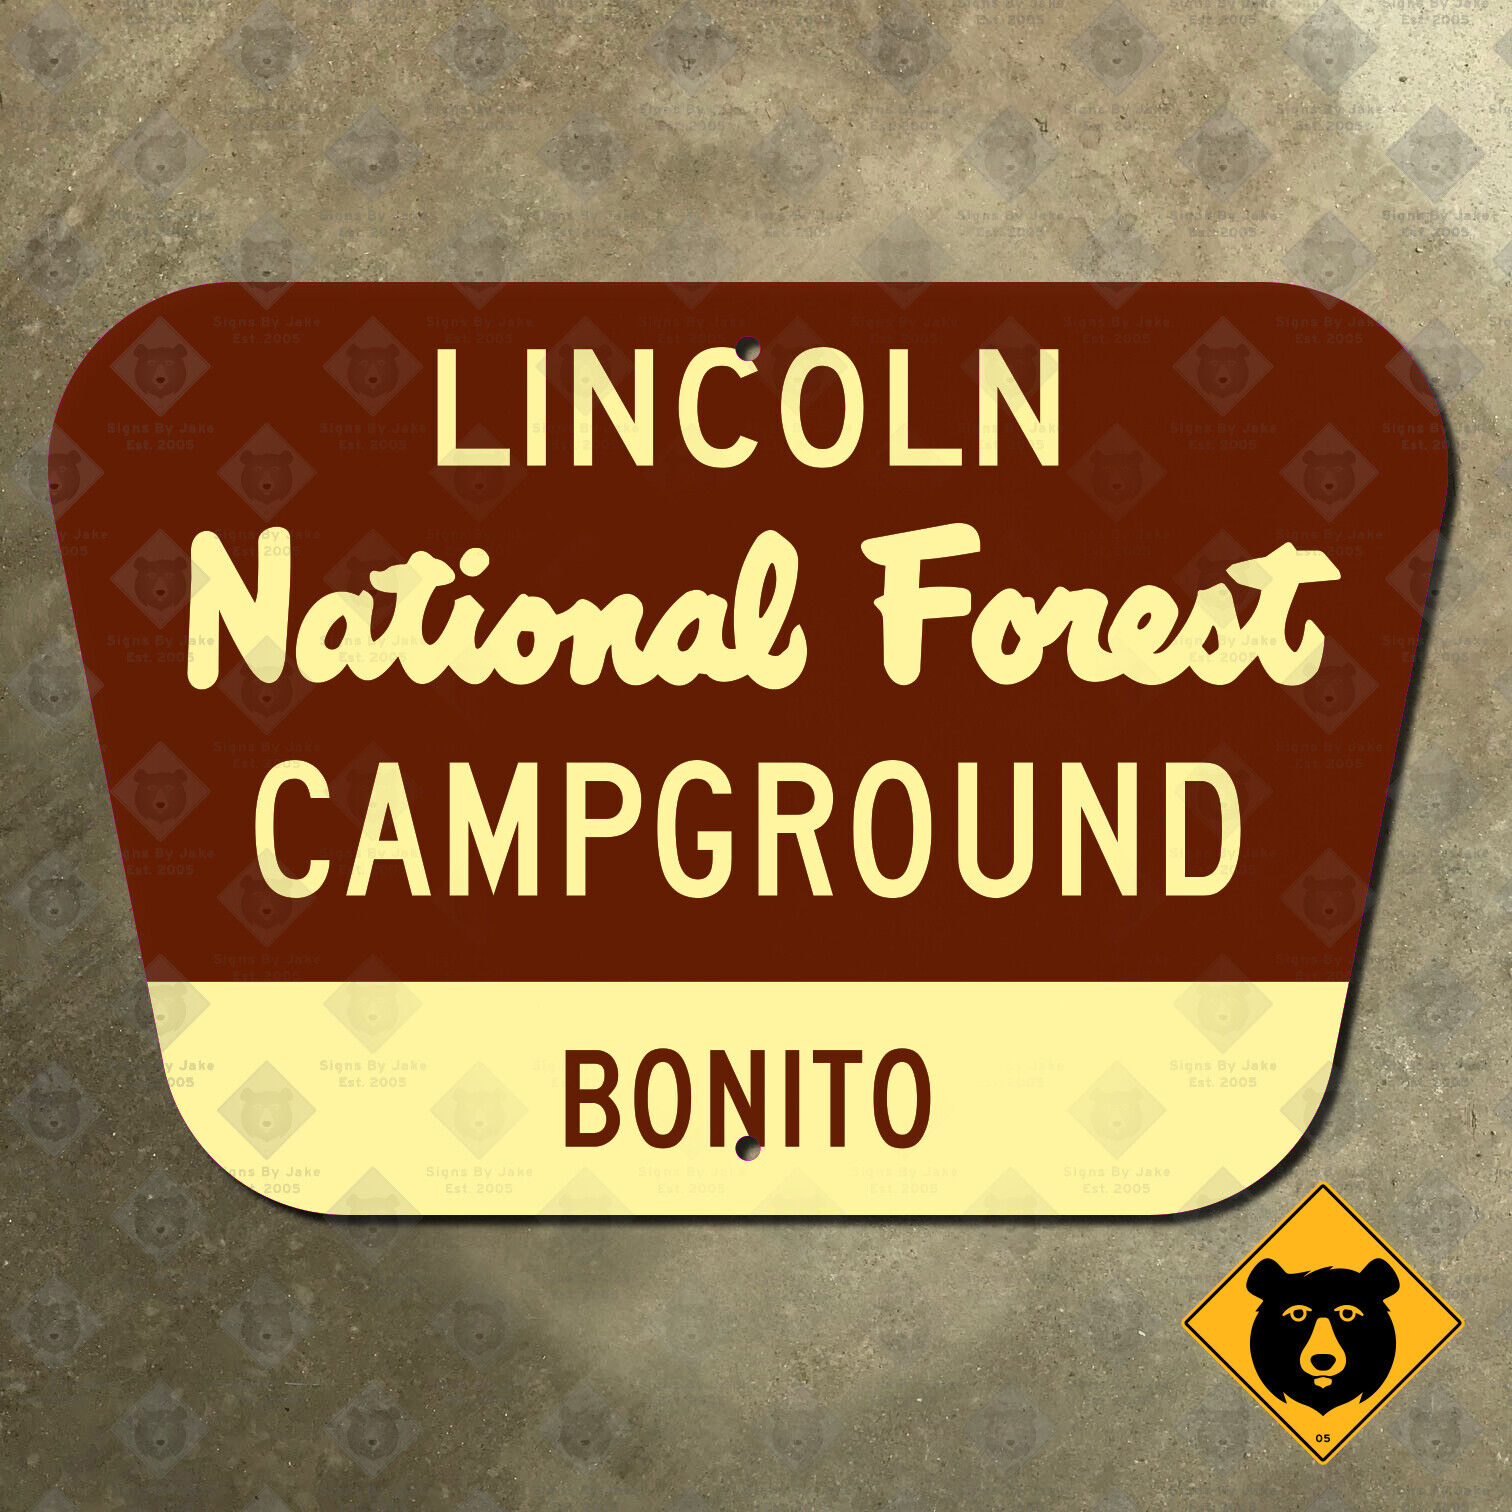 USFS Lincoln National Forest Bonito Campground New Mexico highway sign 15x10